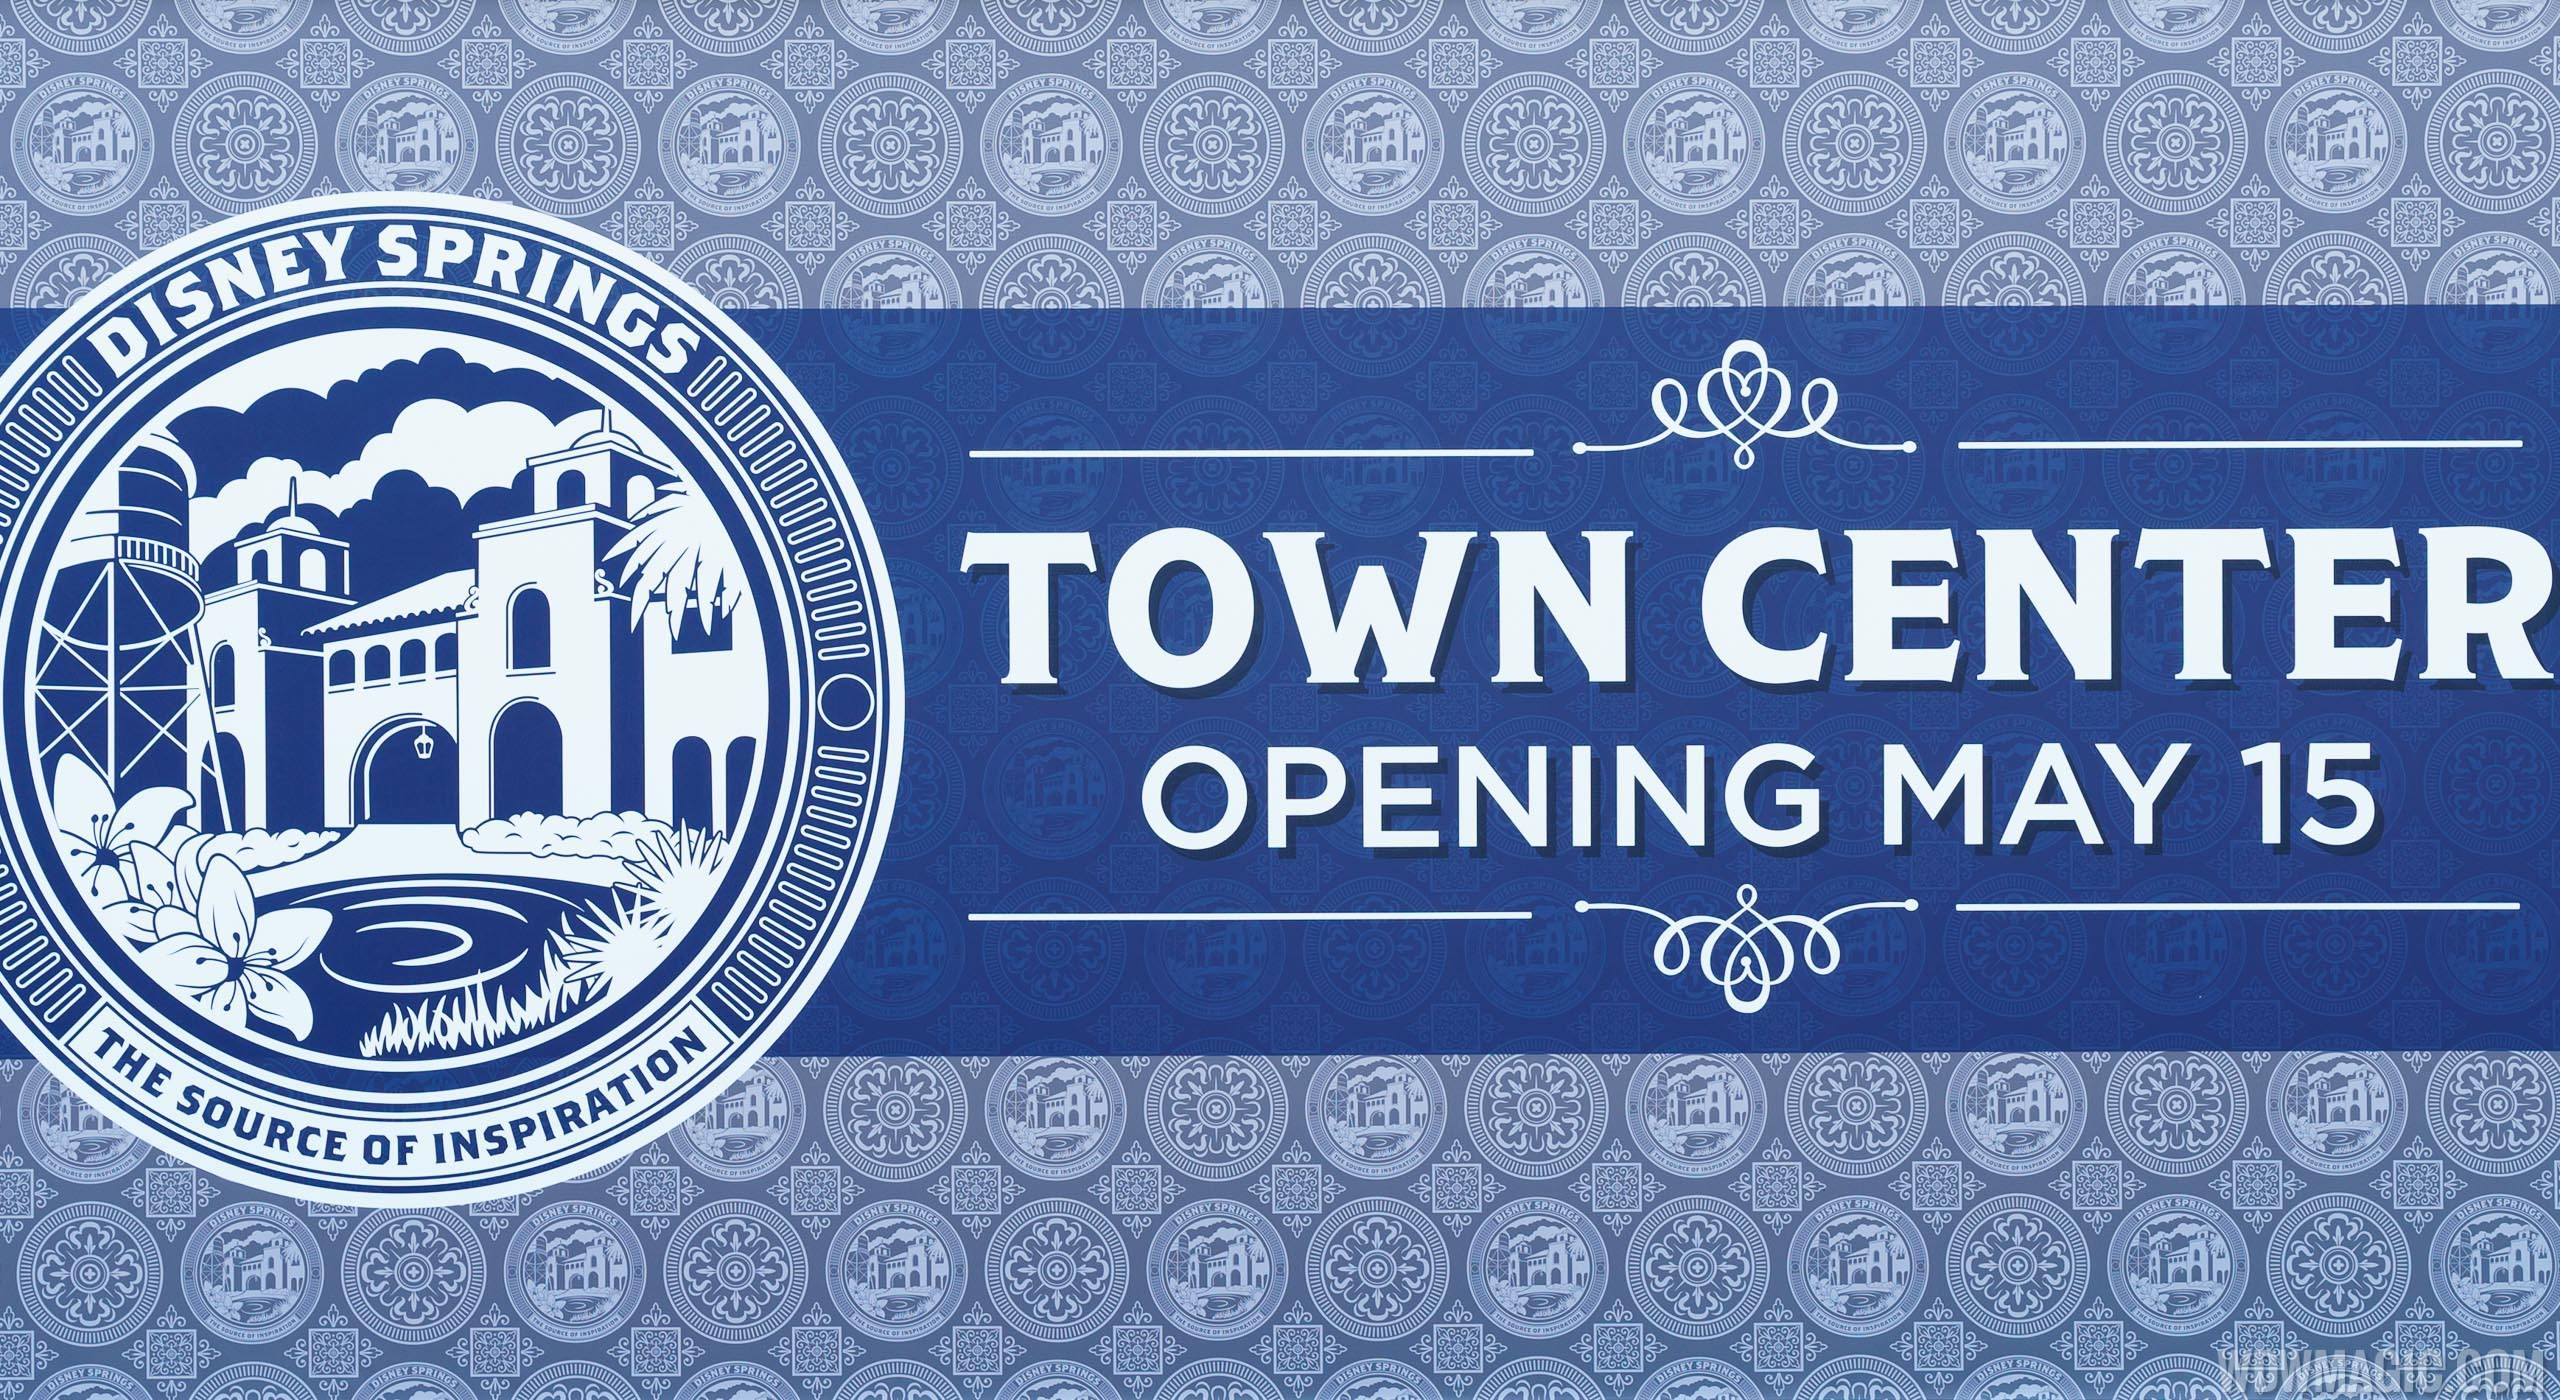 Town Center opening May 15 sign